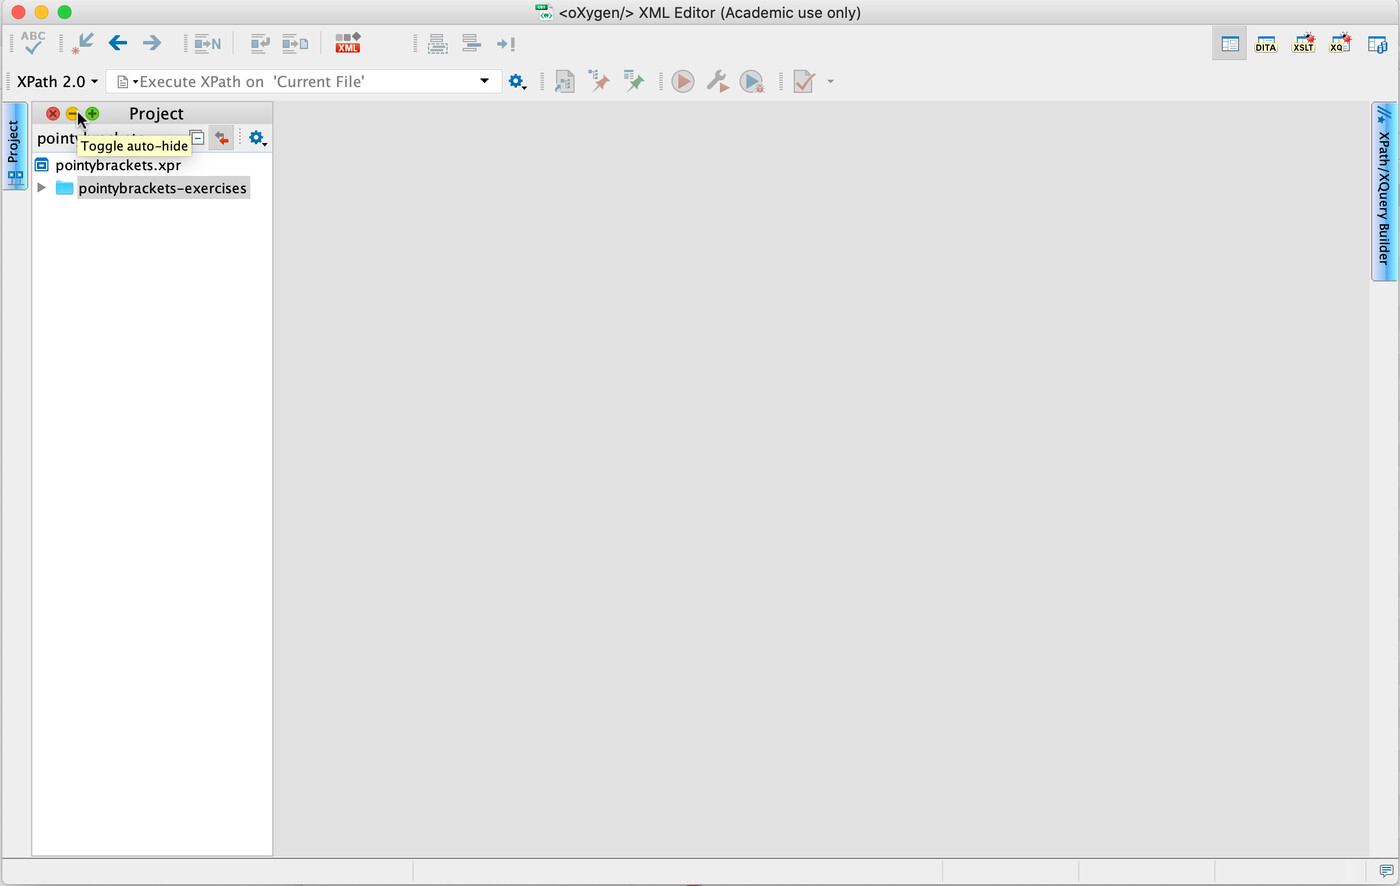 Reveal oXygen’s project panel by hovering over the project tab on the left and clicking the yellow/thumbtack button